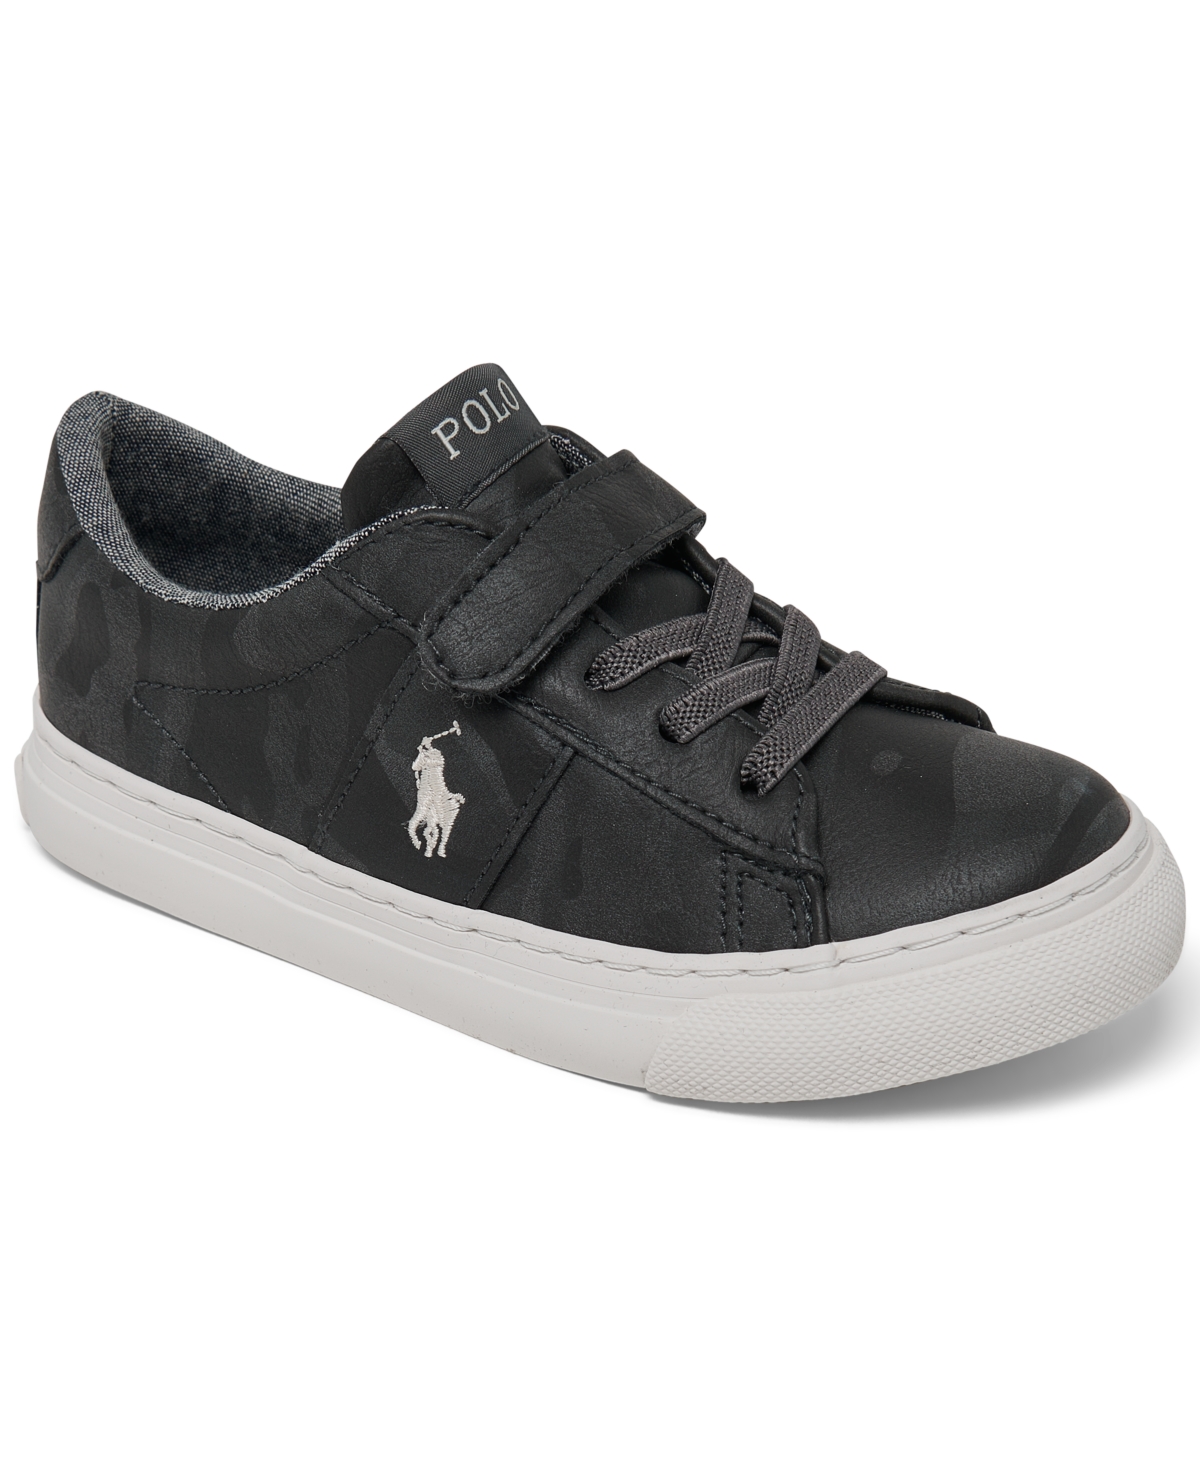 Polo Ralph Lauren Toddler Kids Sayer Stay-put Closure Casual Sneakers From Finish Line In Black,gray,camo,white